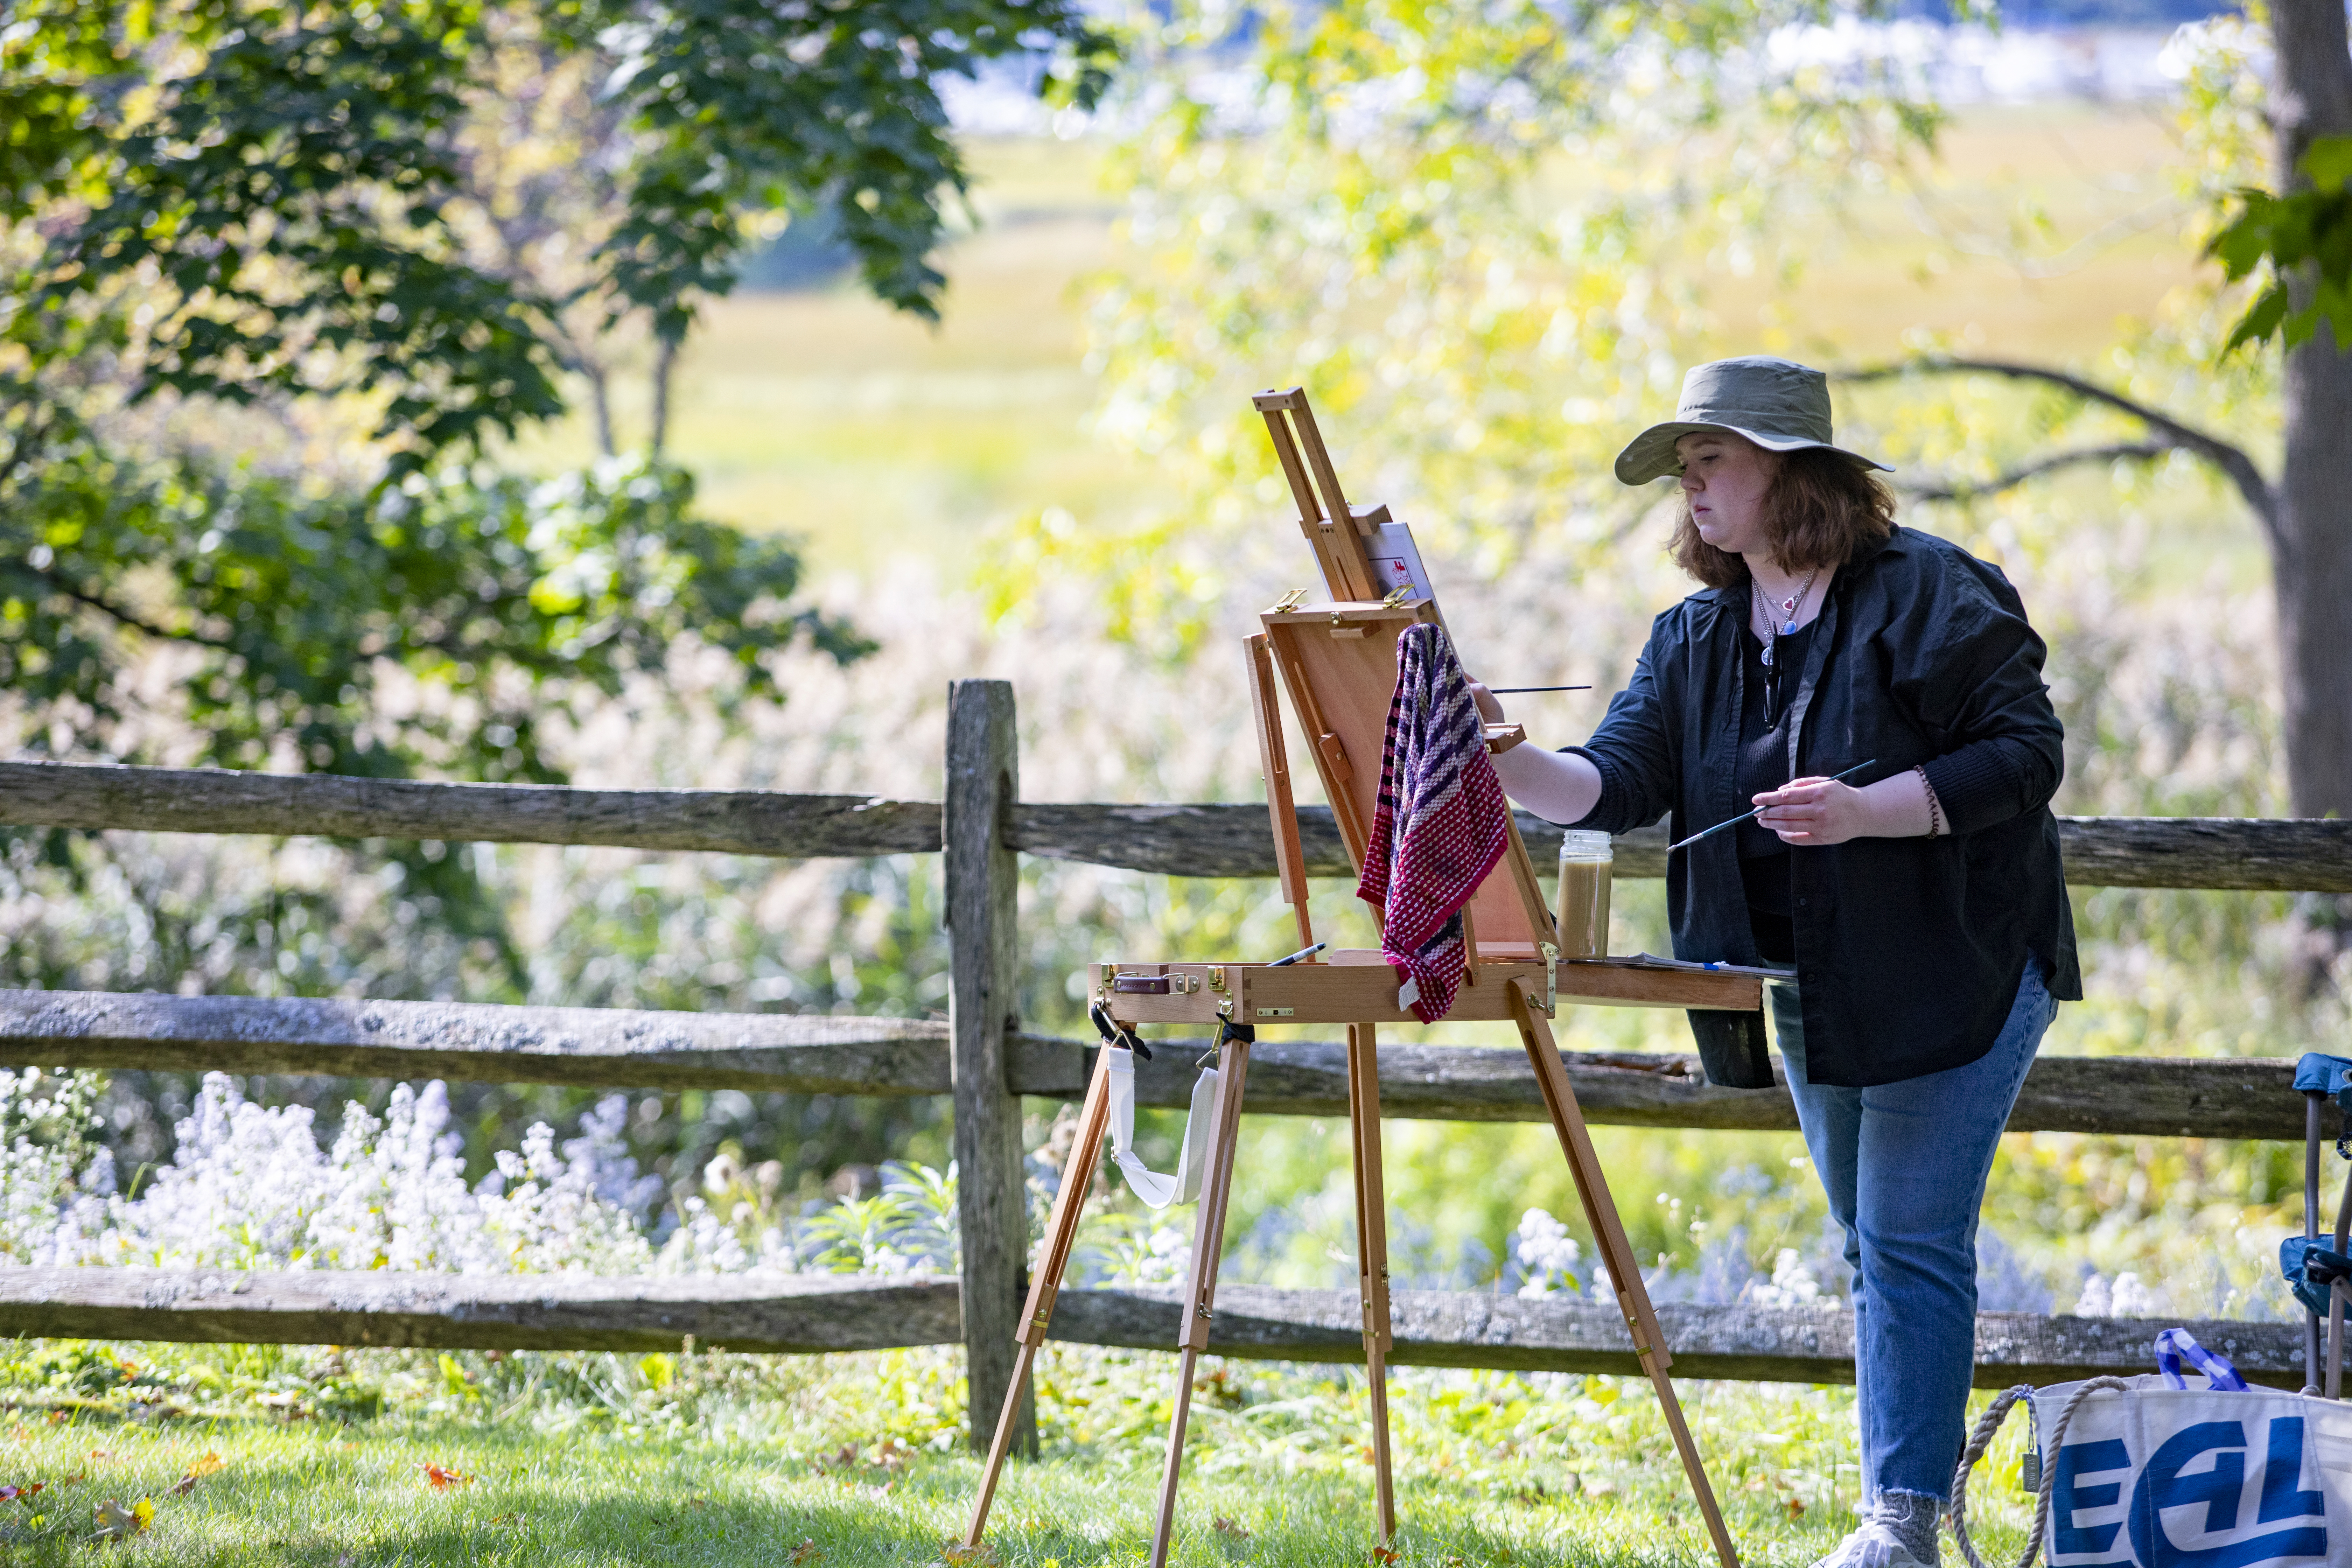 Meghan Messer of Dracut paints during an outdoor painting class at Cogswell's Grant in Essex.